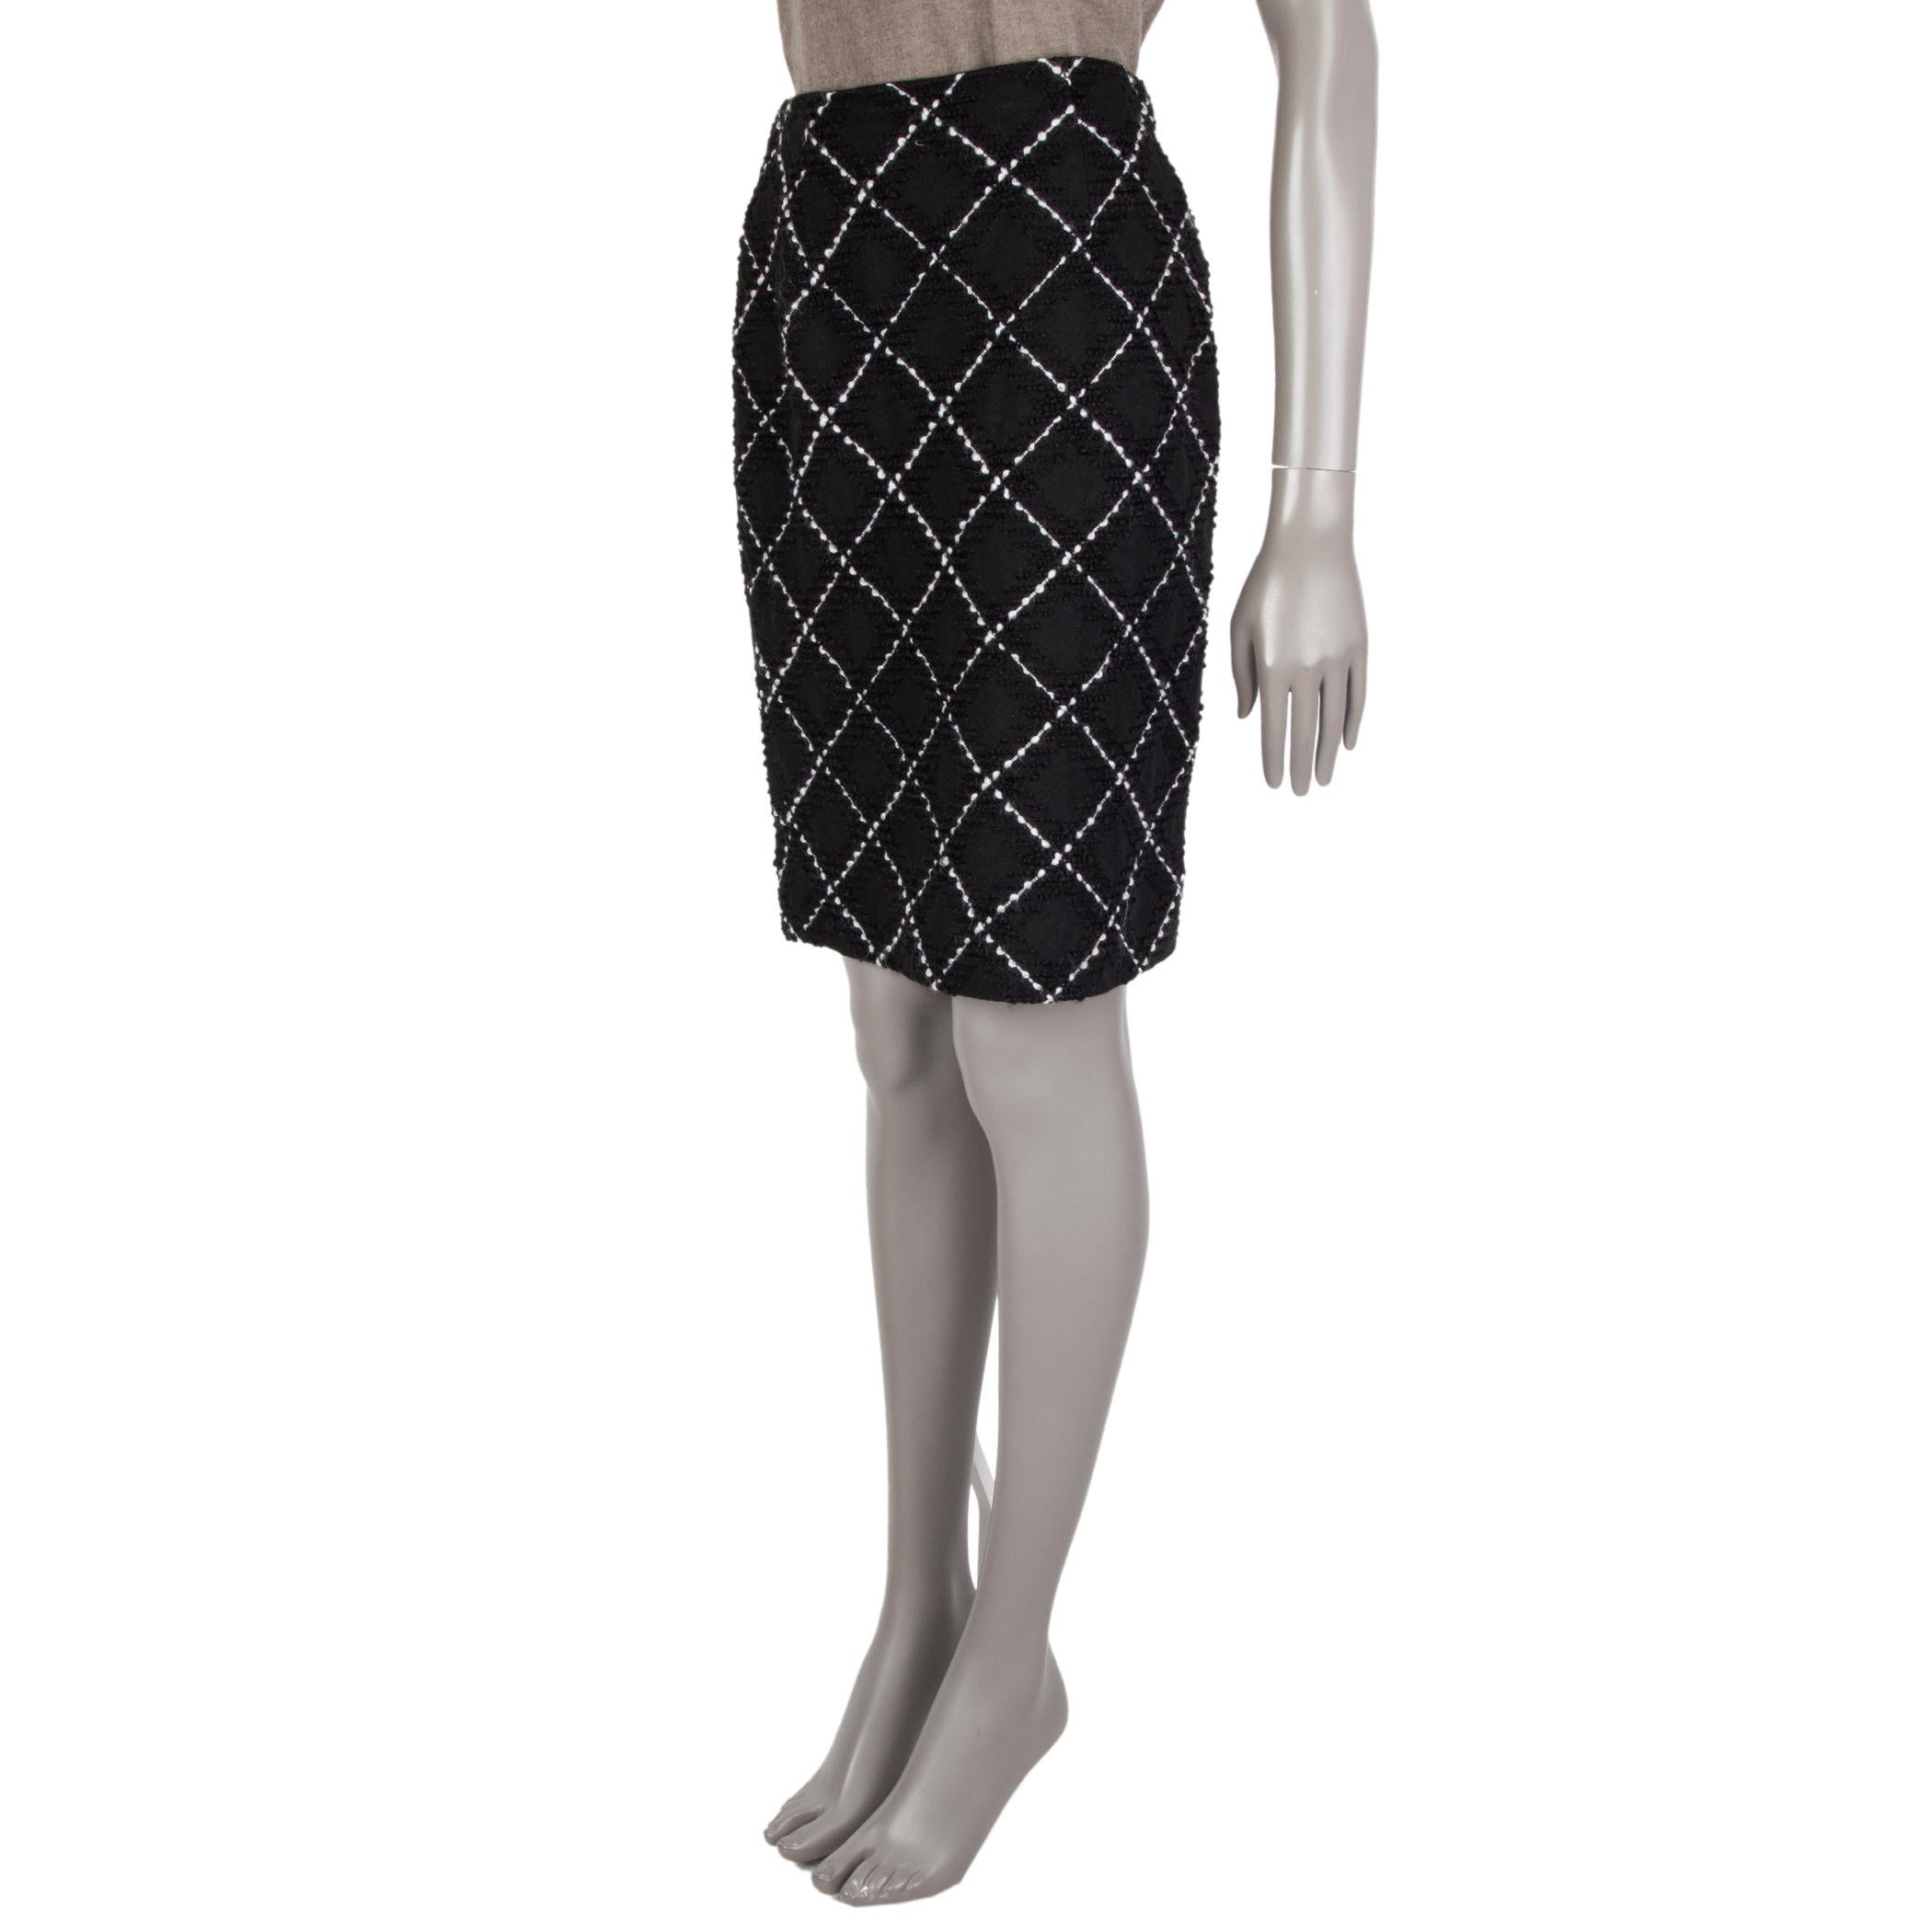 100% authentic Oscar de la Renta embroidered straight skirt in black and white virgin wool (100%). With slit on the back. Closes with hook and invisible zipper on the back. Lined in black silk (100%). Has been worn and is in excellent condition.